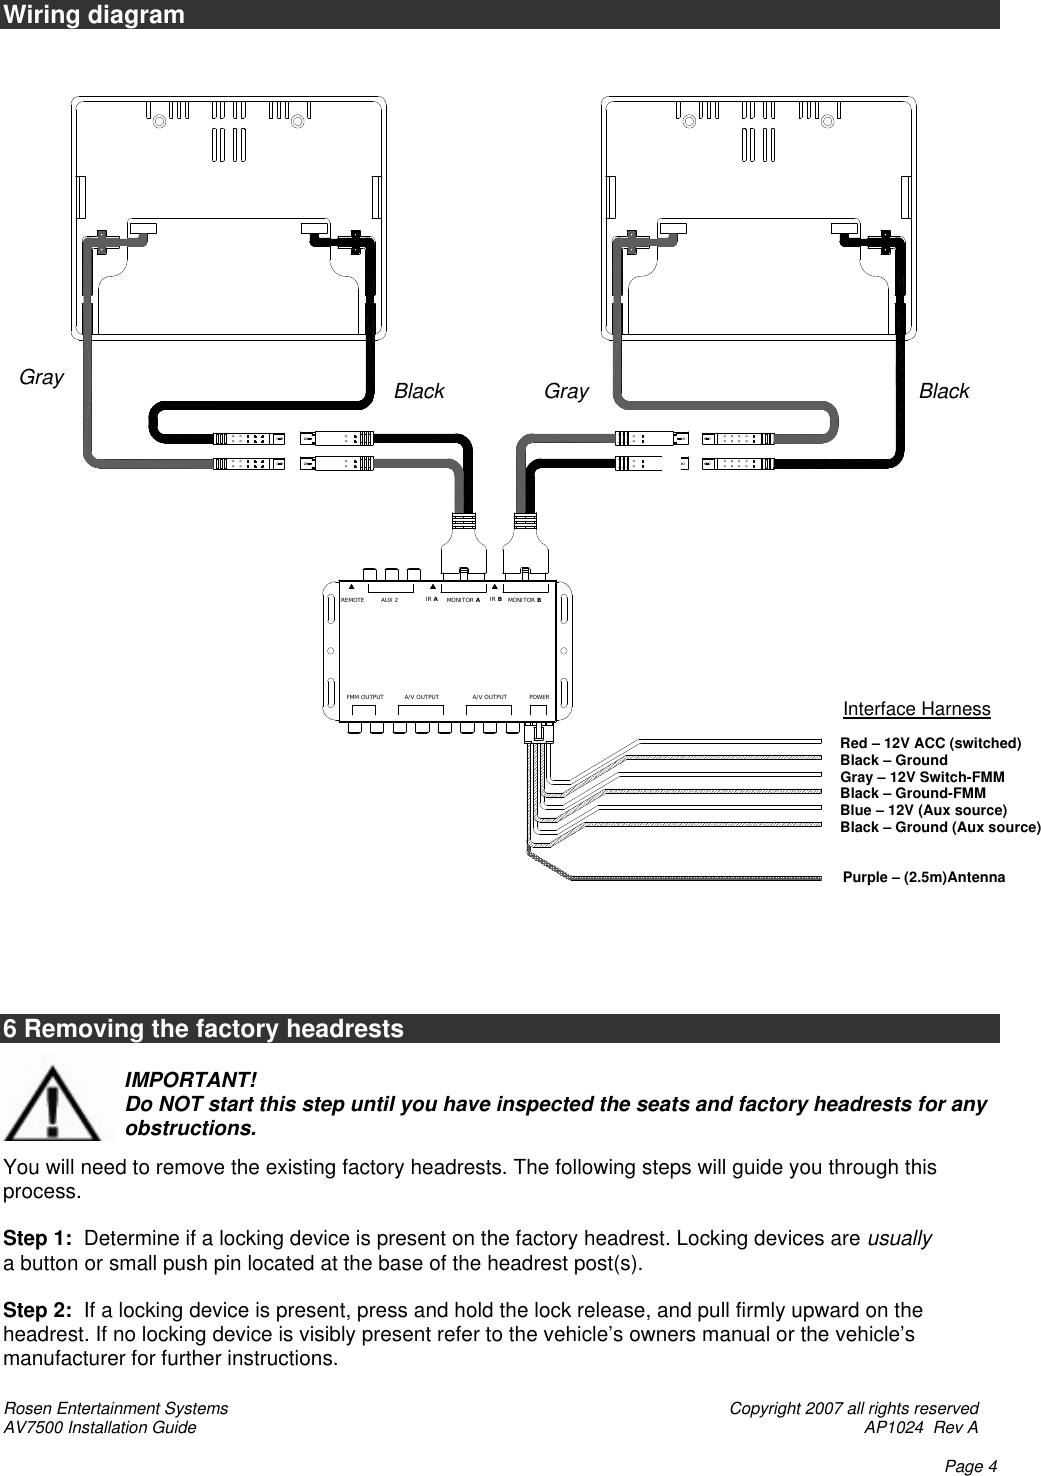 Rosen Entertainment Systems    Copyright 2007 all rights reserved AV7500 Installation Guide    AP1024  Rev A    Page 4 REMOTEPOWERA/V OUTPUTA/V OUTPUTFMM OUTPUTMONITOR BMONITOR AIR BIR AAUX 2 Wiring diagram   6 Removing the factory headrests                       IMPORTANT!                       Do NOT start this step until you have inspected the seats and factory headrests for any                      obstructions.                                   You will need to remove the existing factory headrests. The following steps will guide you through this process.  Step 1:  Determine if a locking device is present on the factory headrest. Locking devices are usually a button or small push pin located at the base of the headrest post(s).  Step 2:  If a locking device is present, press and hold the lock release, and pull firmly upward on the headrest. If no locking device is visibly present refer to the vehicle’s owners manual or the vehicle’s manufacturer for further instructions.      Red – 12V ACC (switched)     Black – Ground     Gray – 12V Switch-FMM     Black – Ground-FMM     Blue – 12V (Aux source)     Black – Ground (Aux source)           Purple – (2.5m)Antenna  Interface Harness  Black Black  Gray   Gray      